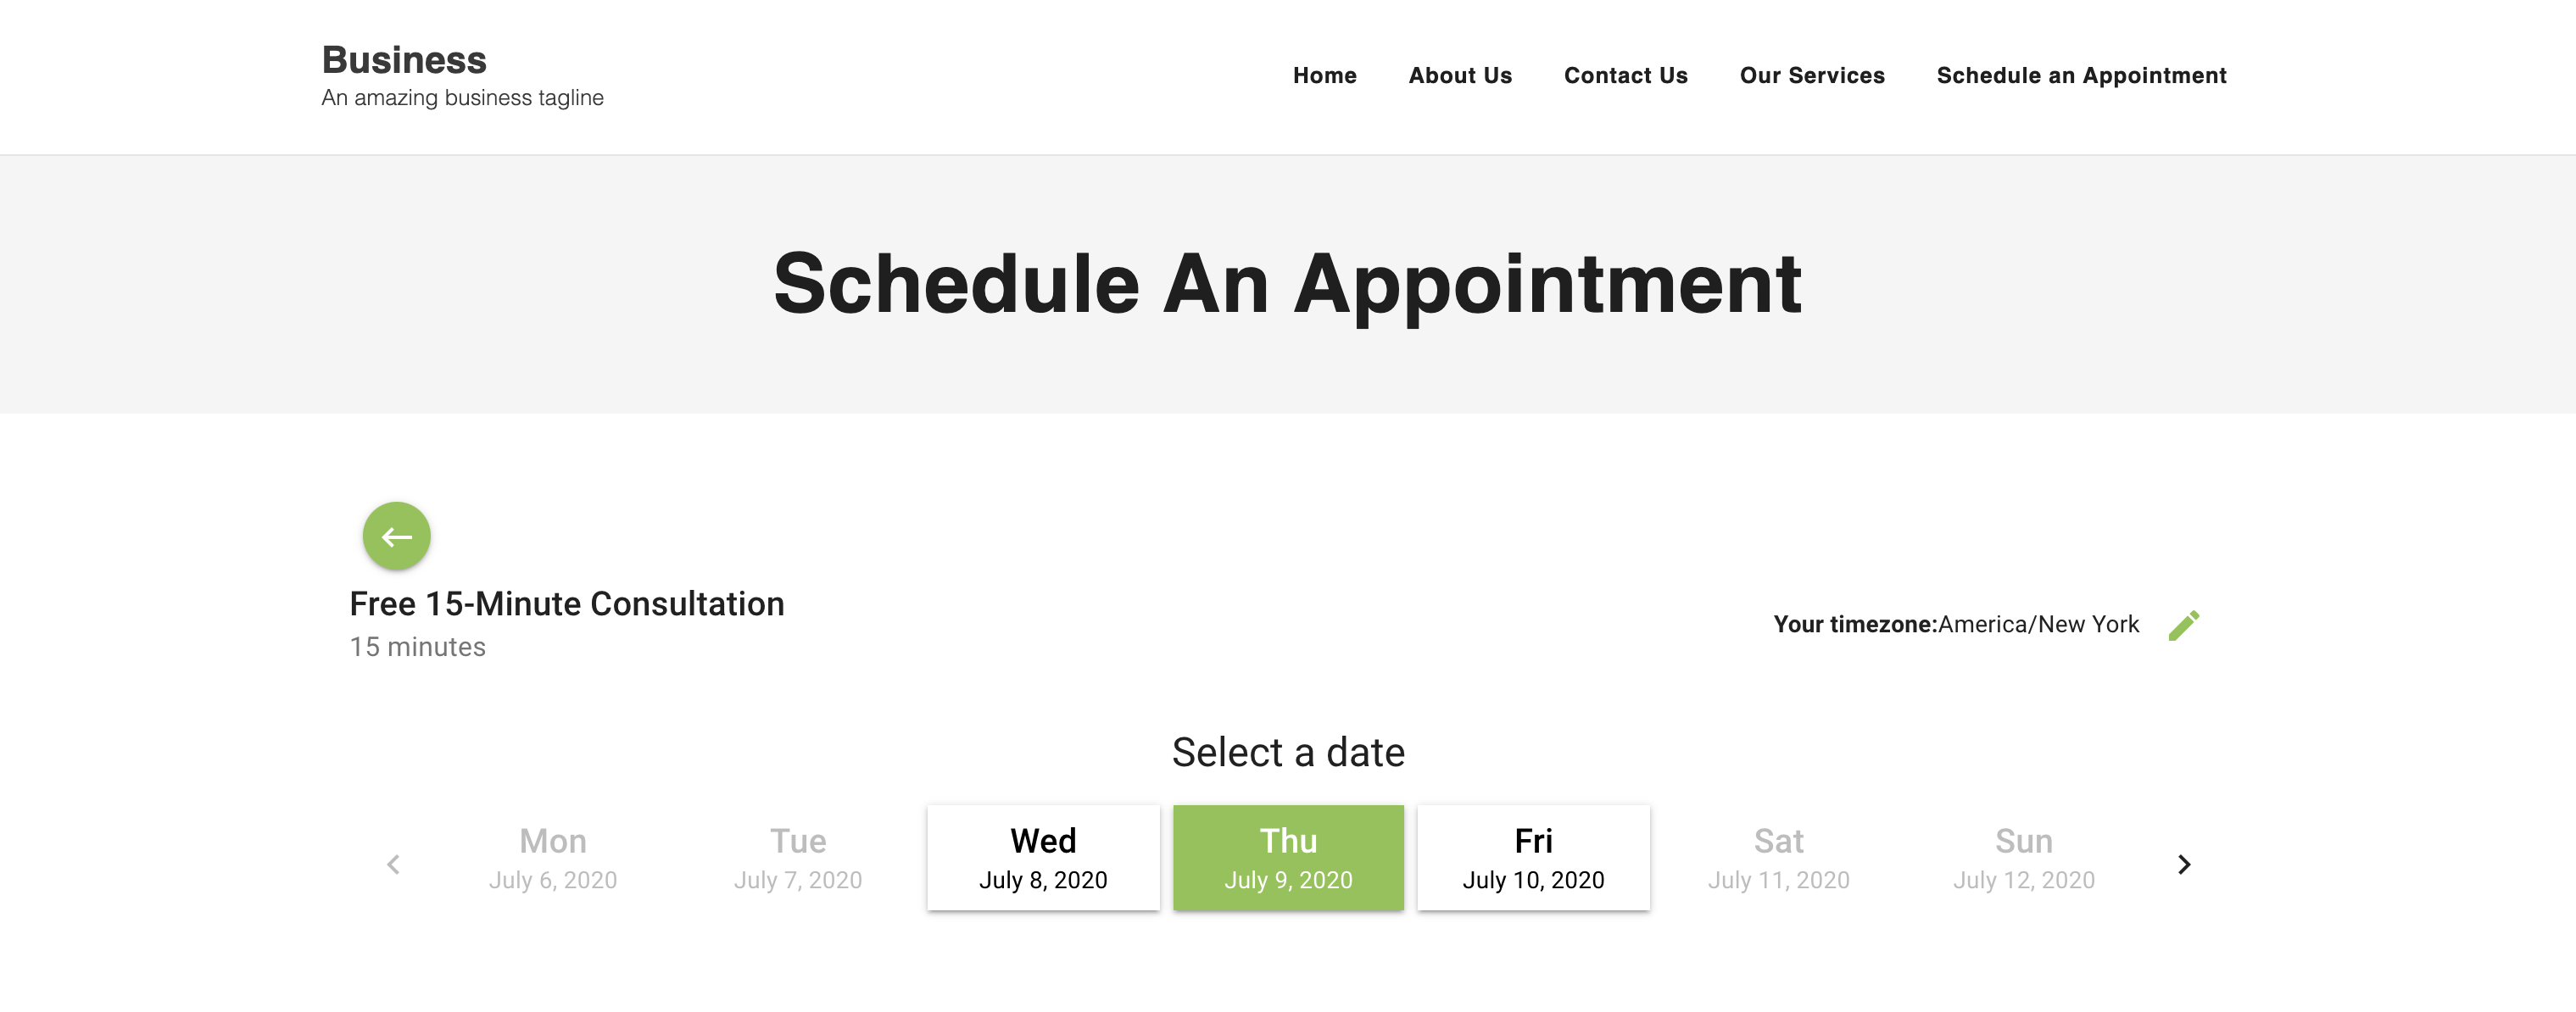 View the Booking Calendar Availability using a Weekly View.